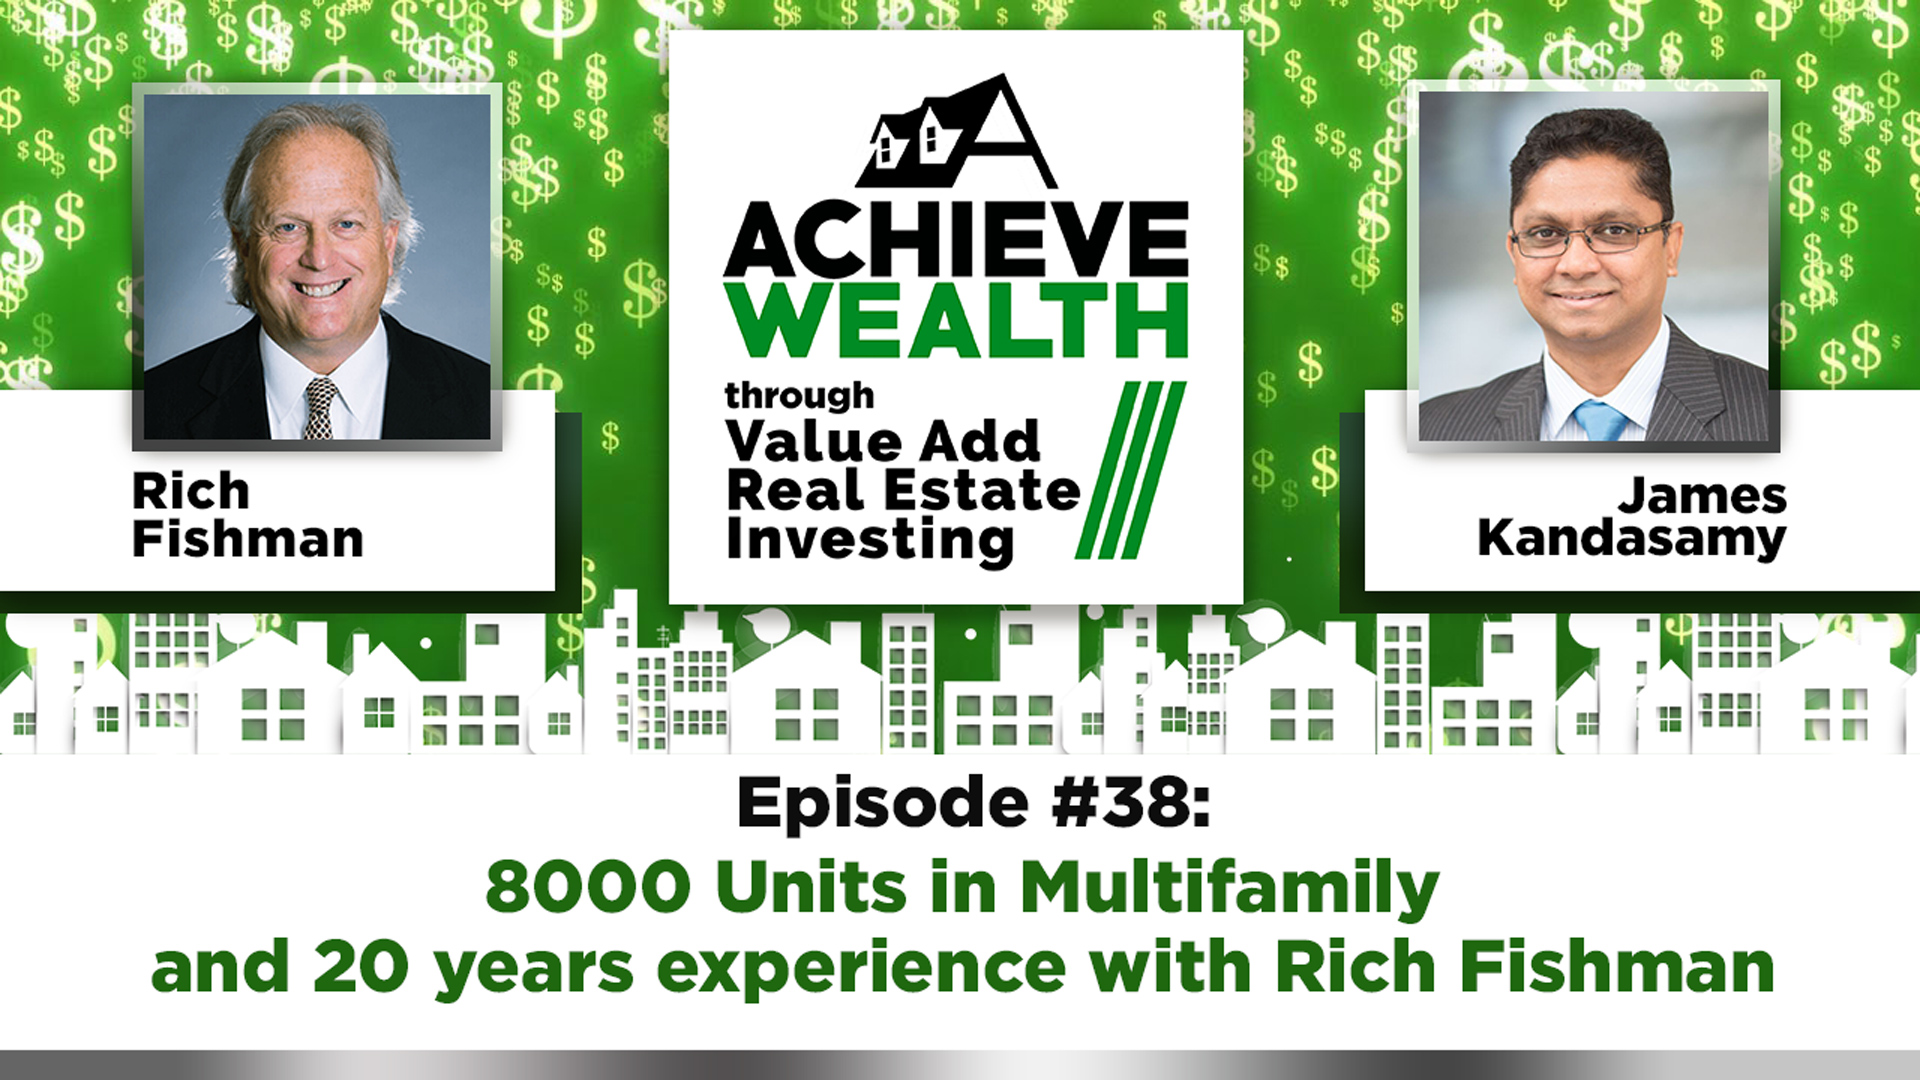 8000 Units in Multifamily, 20 Years Experience with Rich Fishman